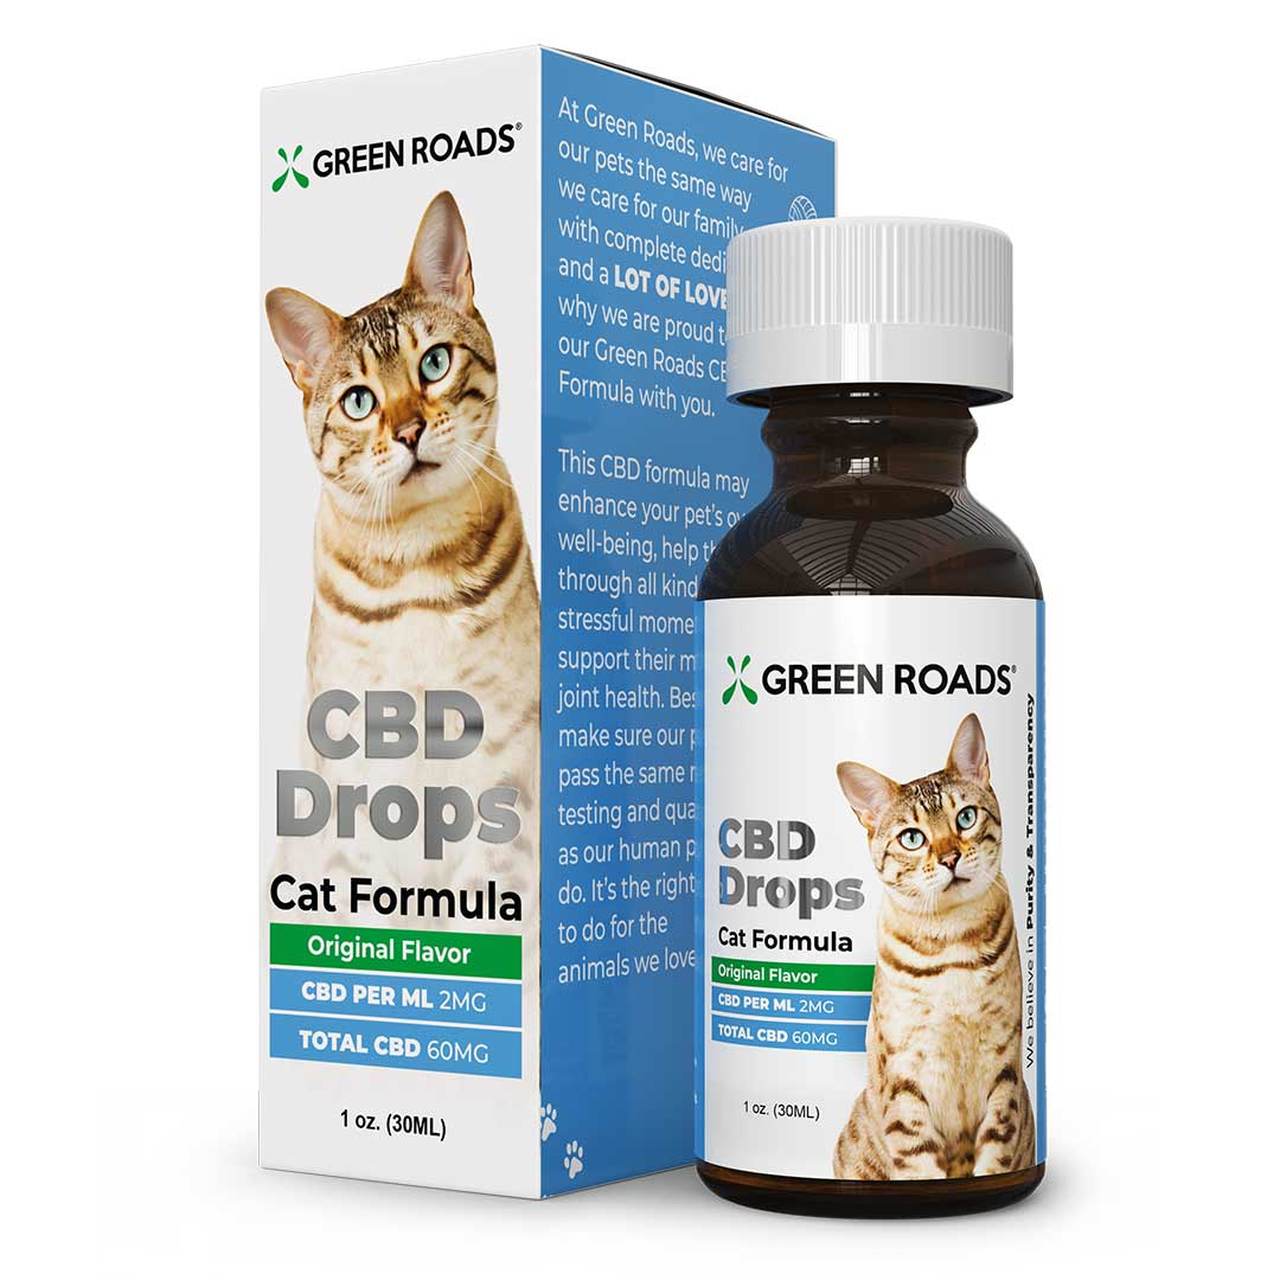 What Is Cbd Oil For Cats?